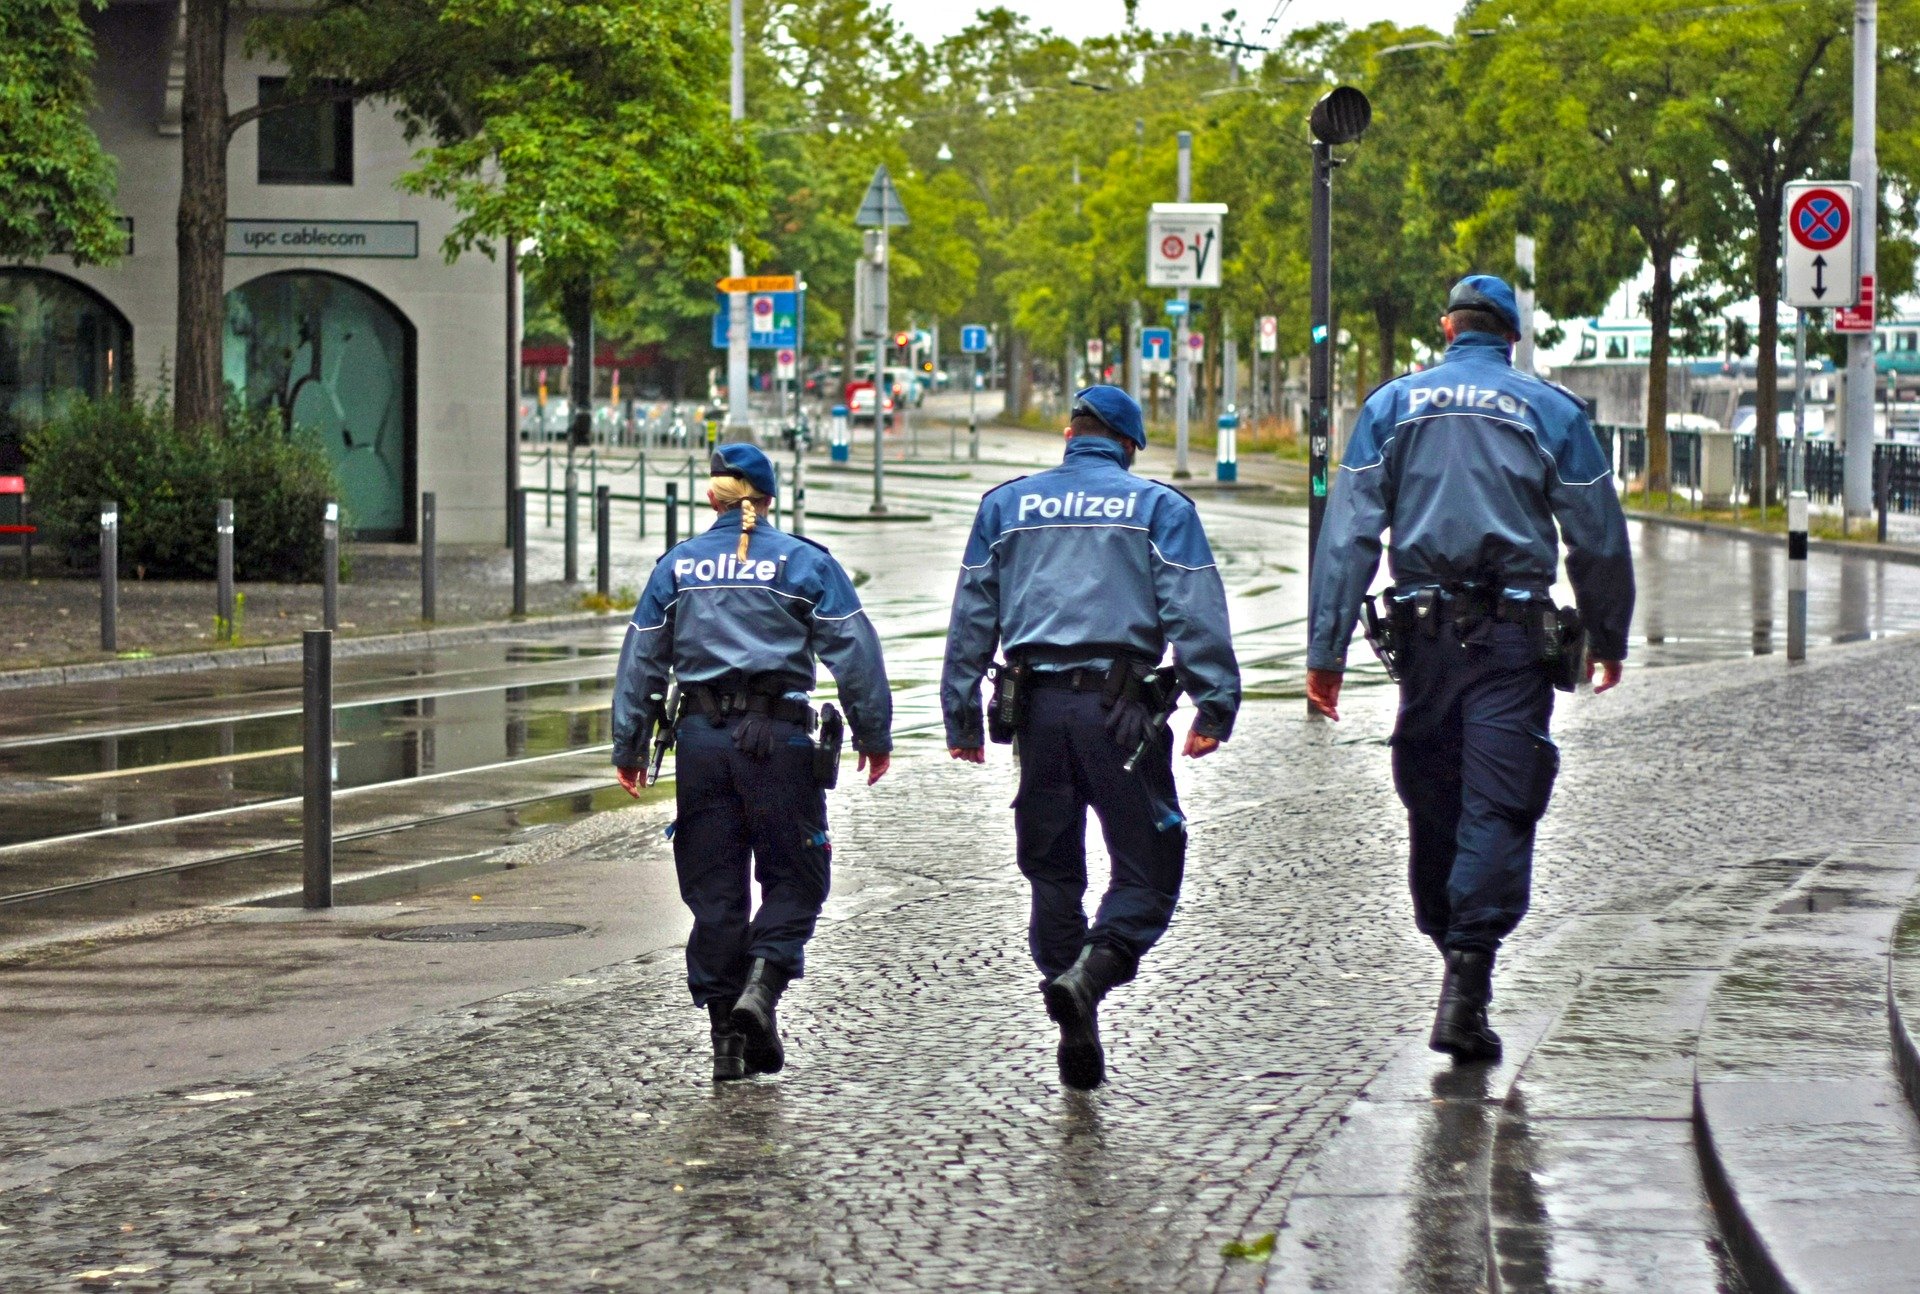 Law enforcement officers walking down the street | Source: Pixabay